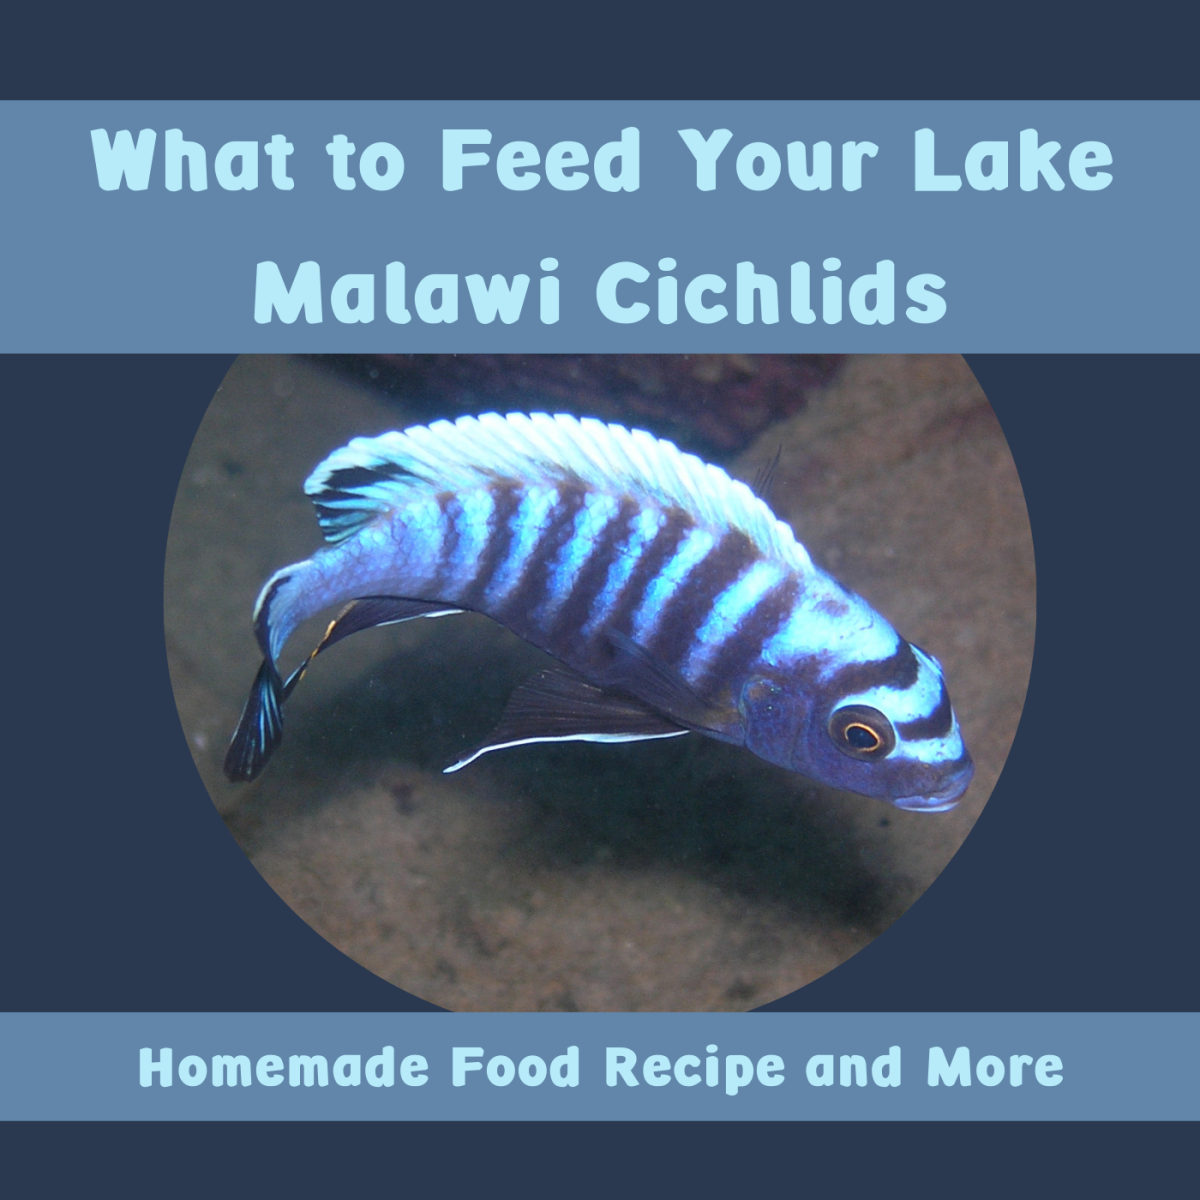 Learn what to consider when choosing a food, how to make your own food and how often you should feed your cichlids.